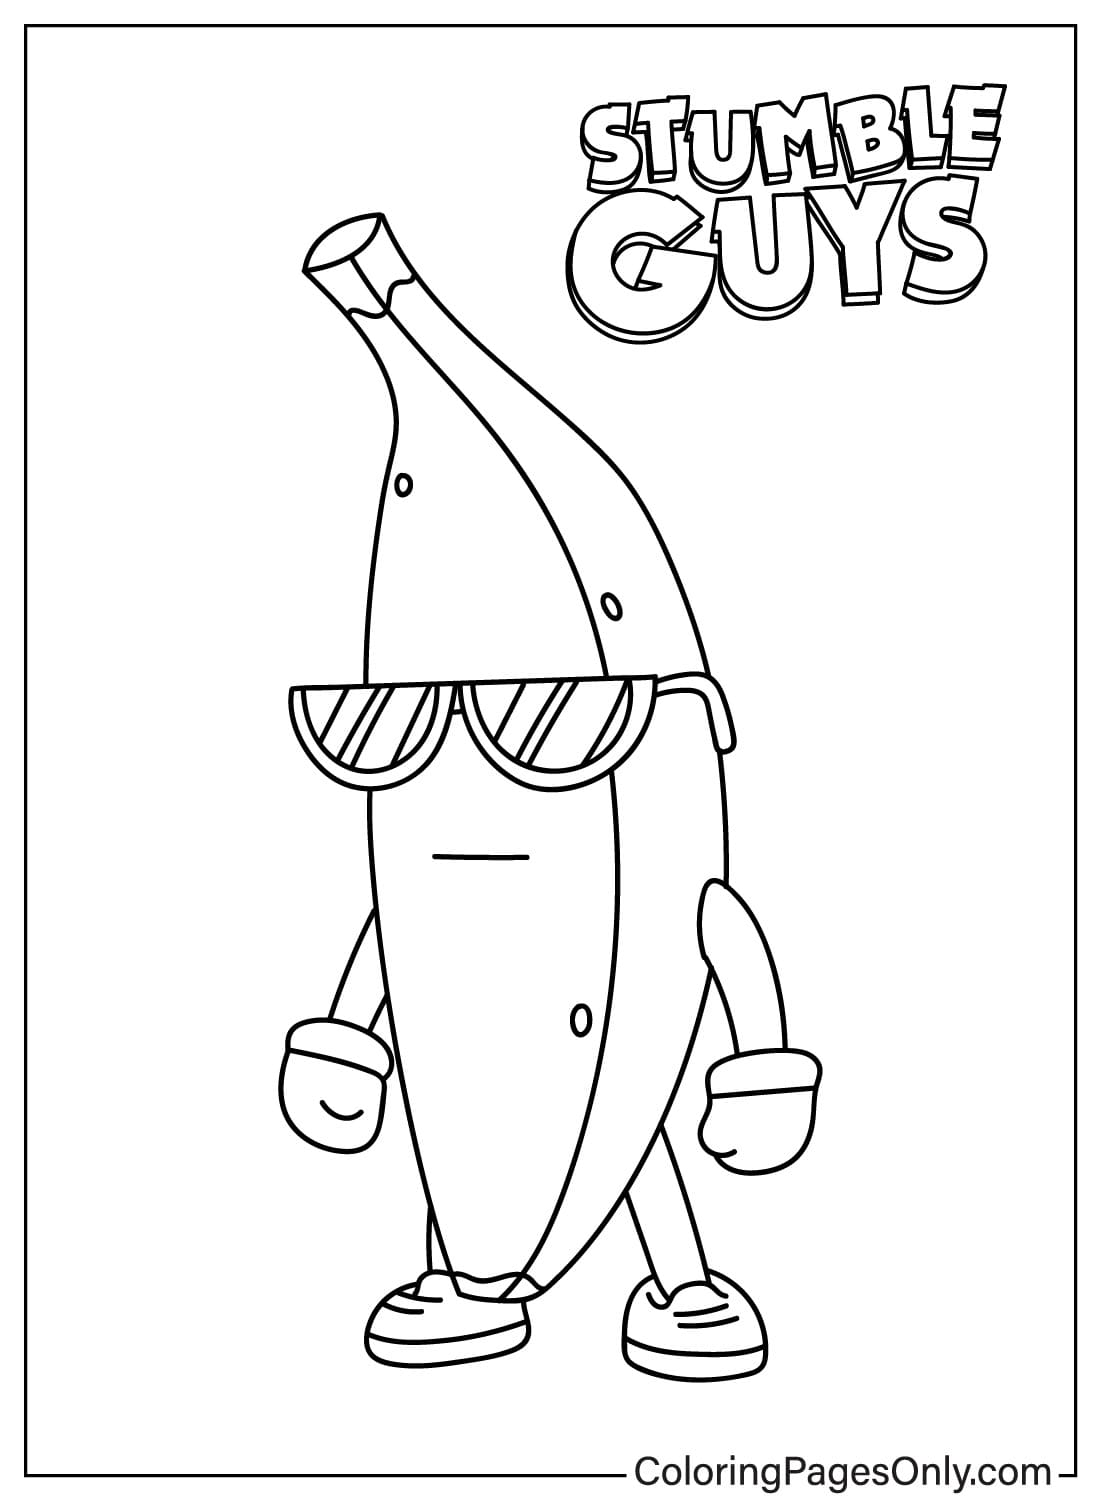 22 Free Printable Stumble Guys Coloring Pages